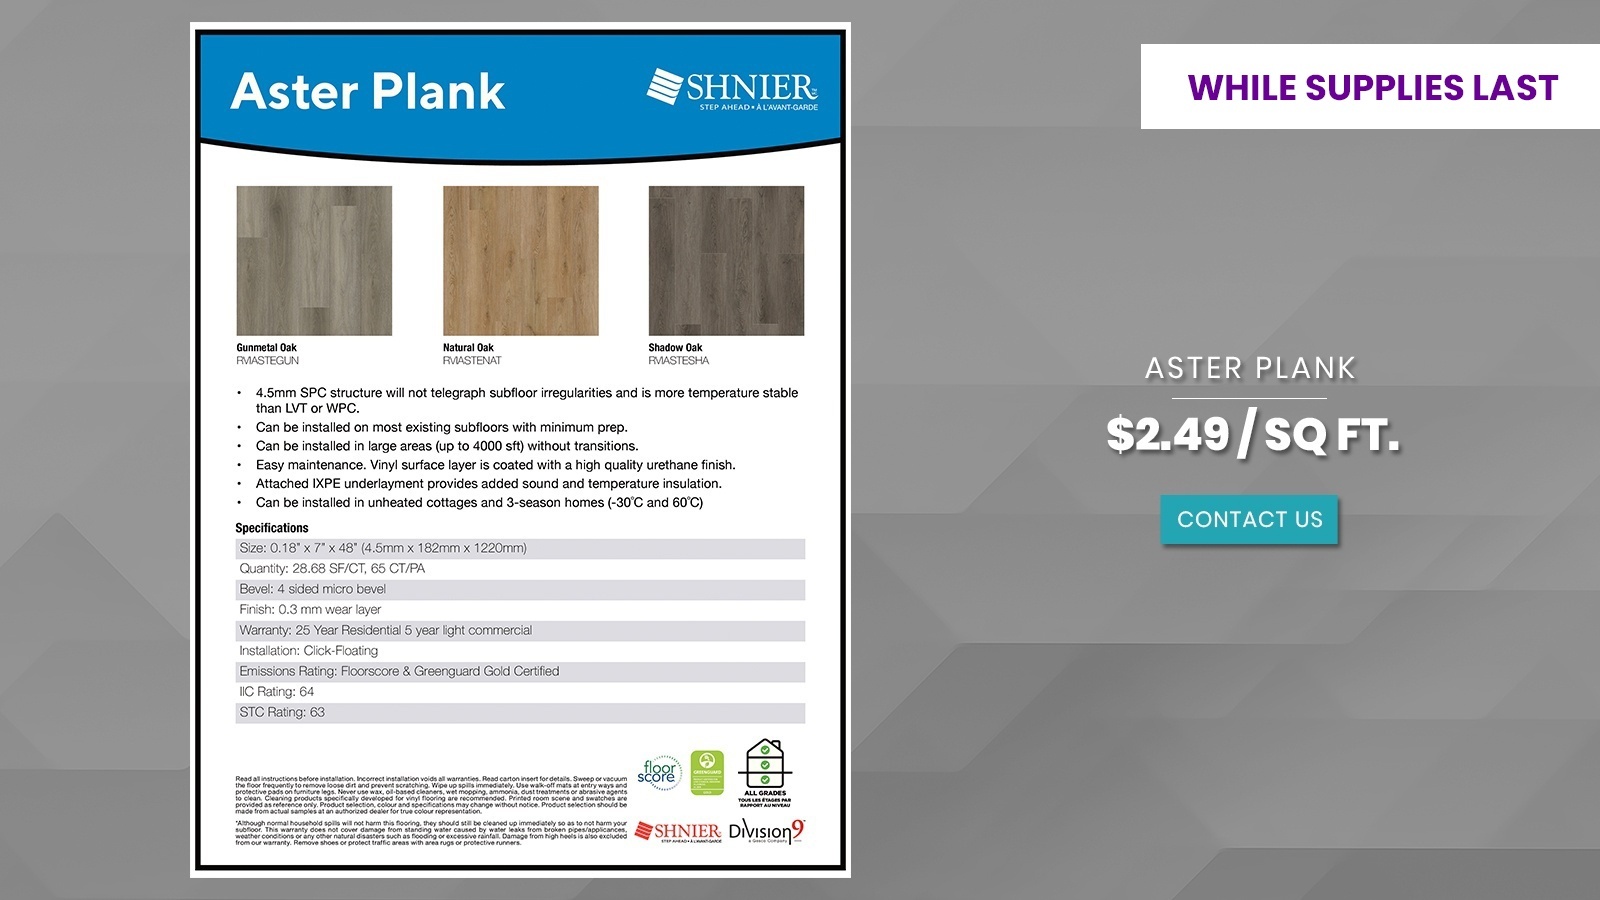 Aster Plank